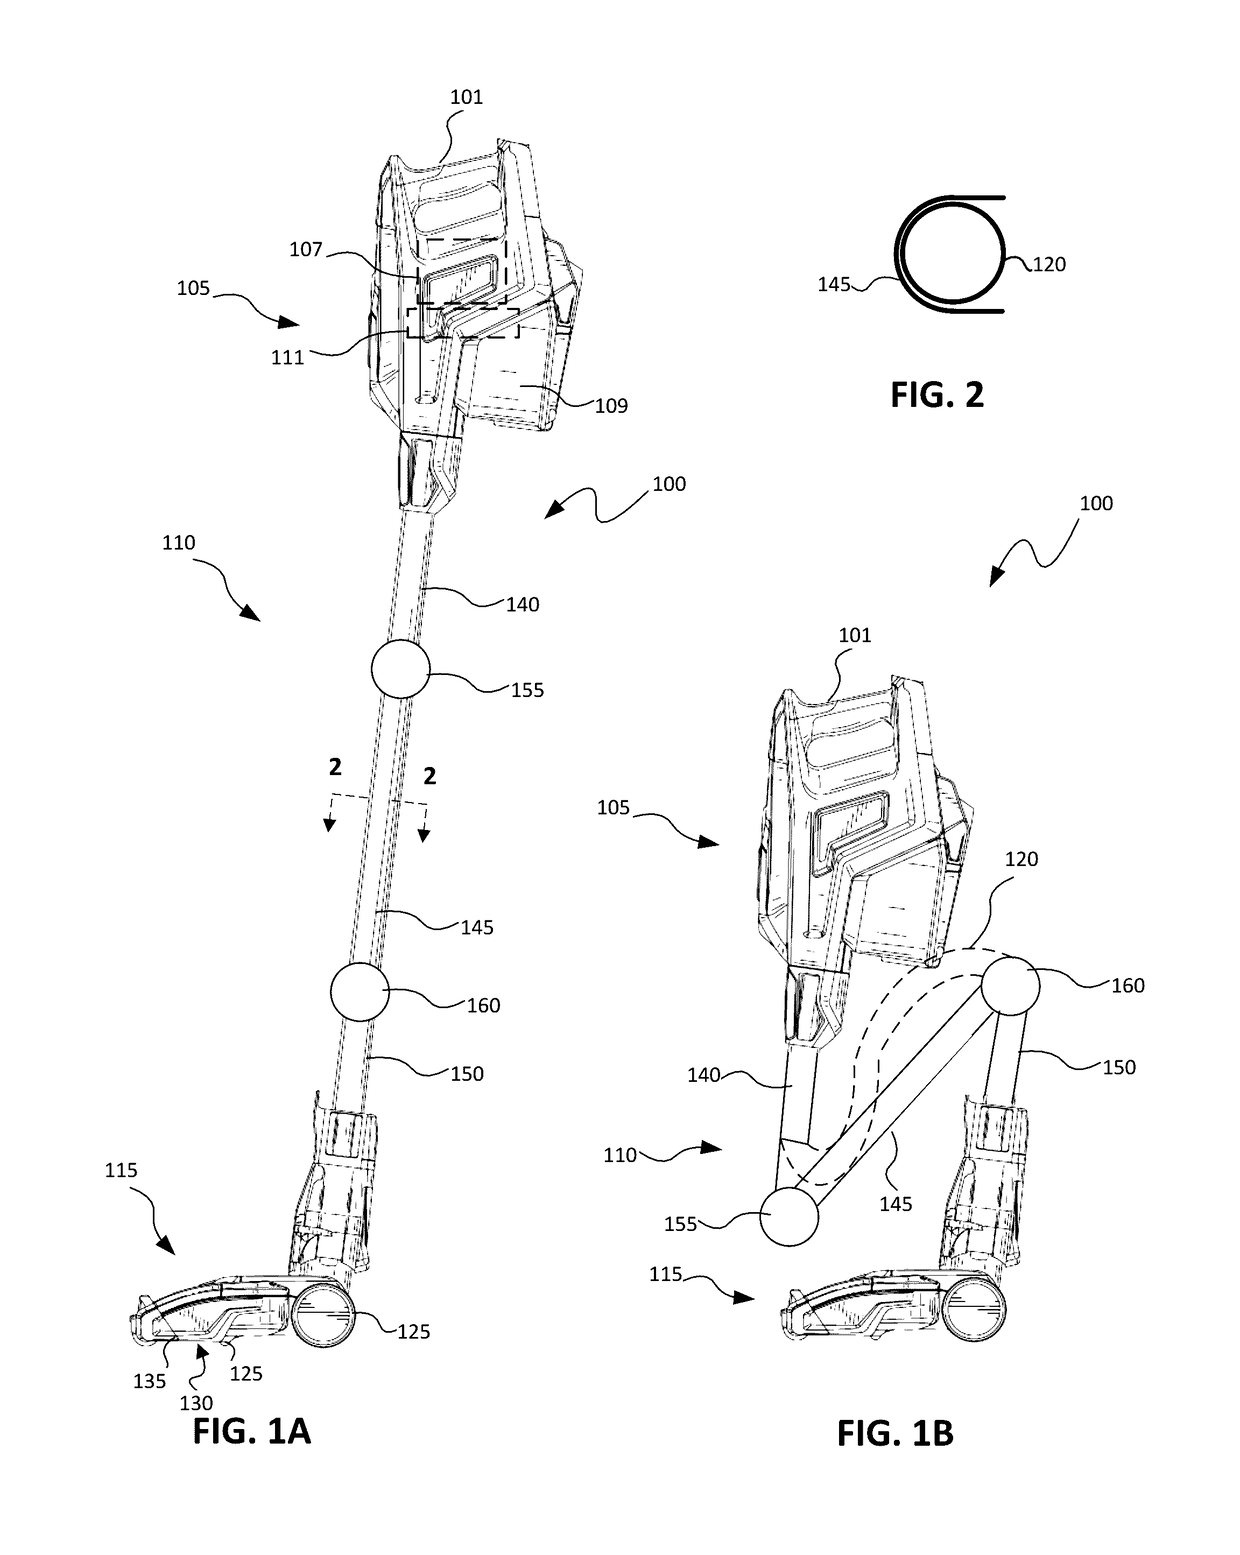 Vacuum cleaning device with foldable wand to provide storage configuration